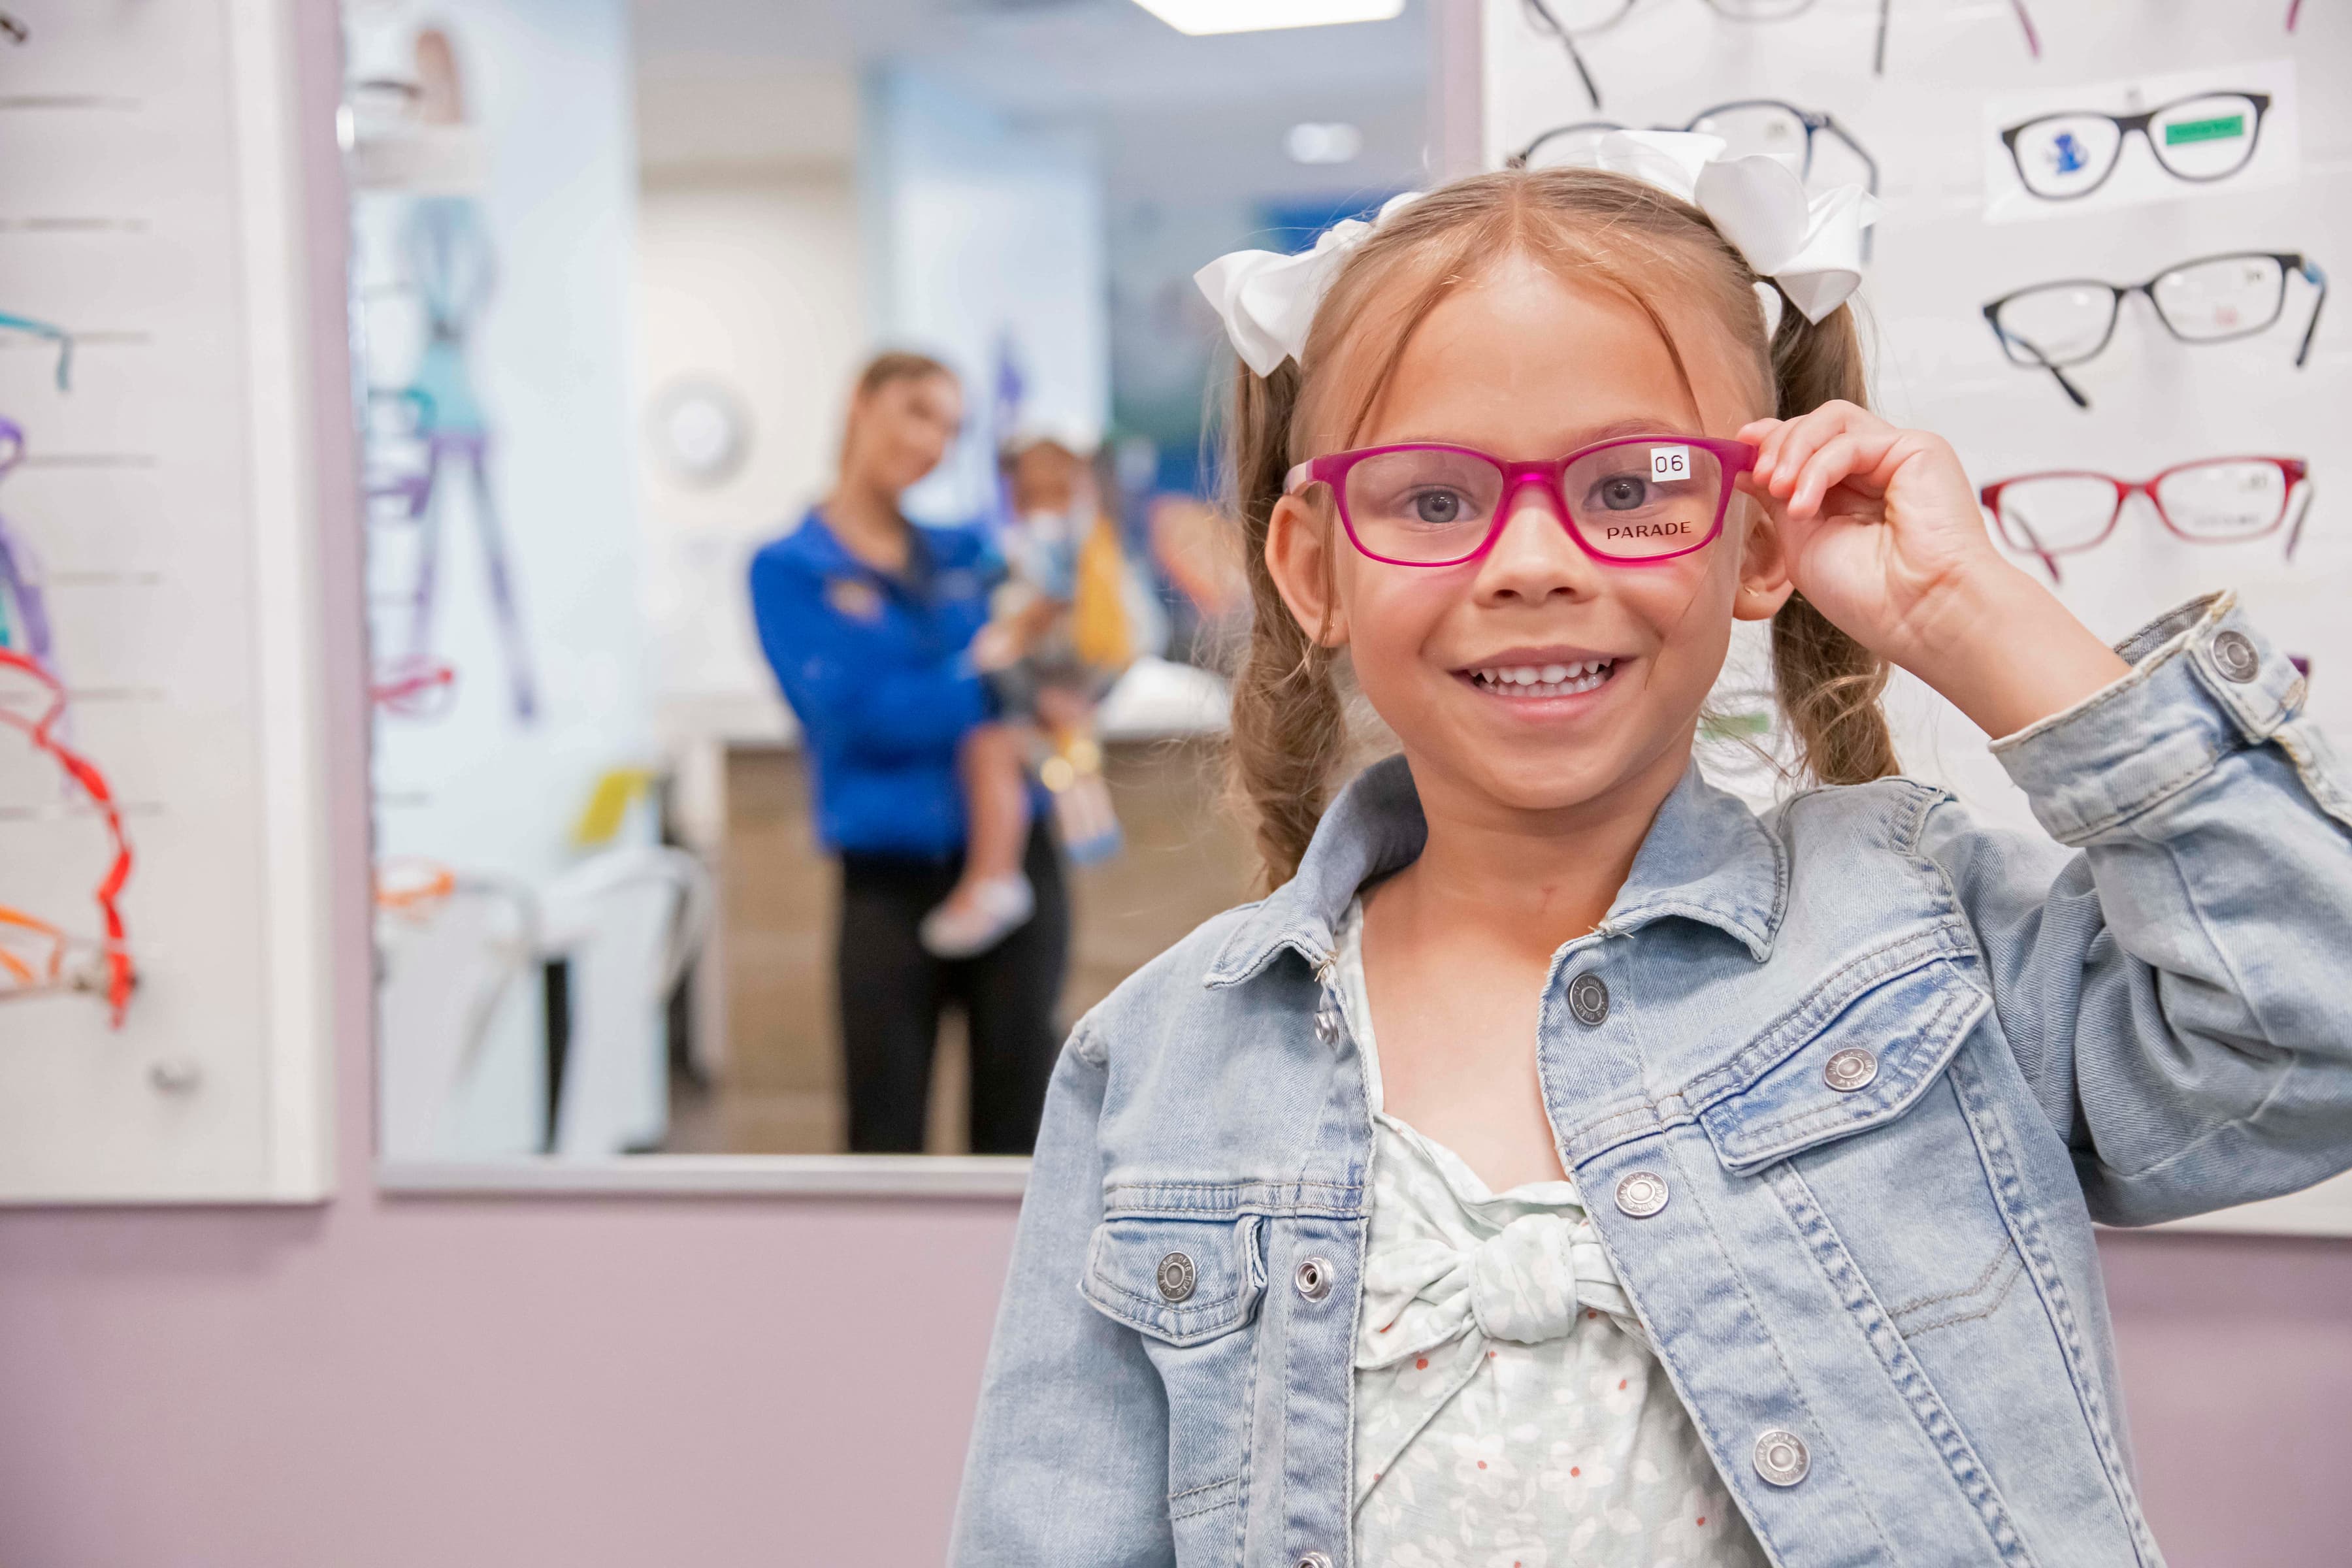 Young girl trying on pink glasses at a children's optometrist office